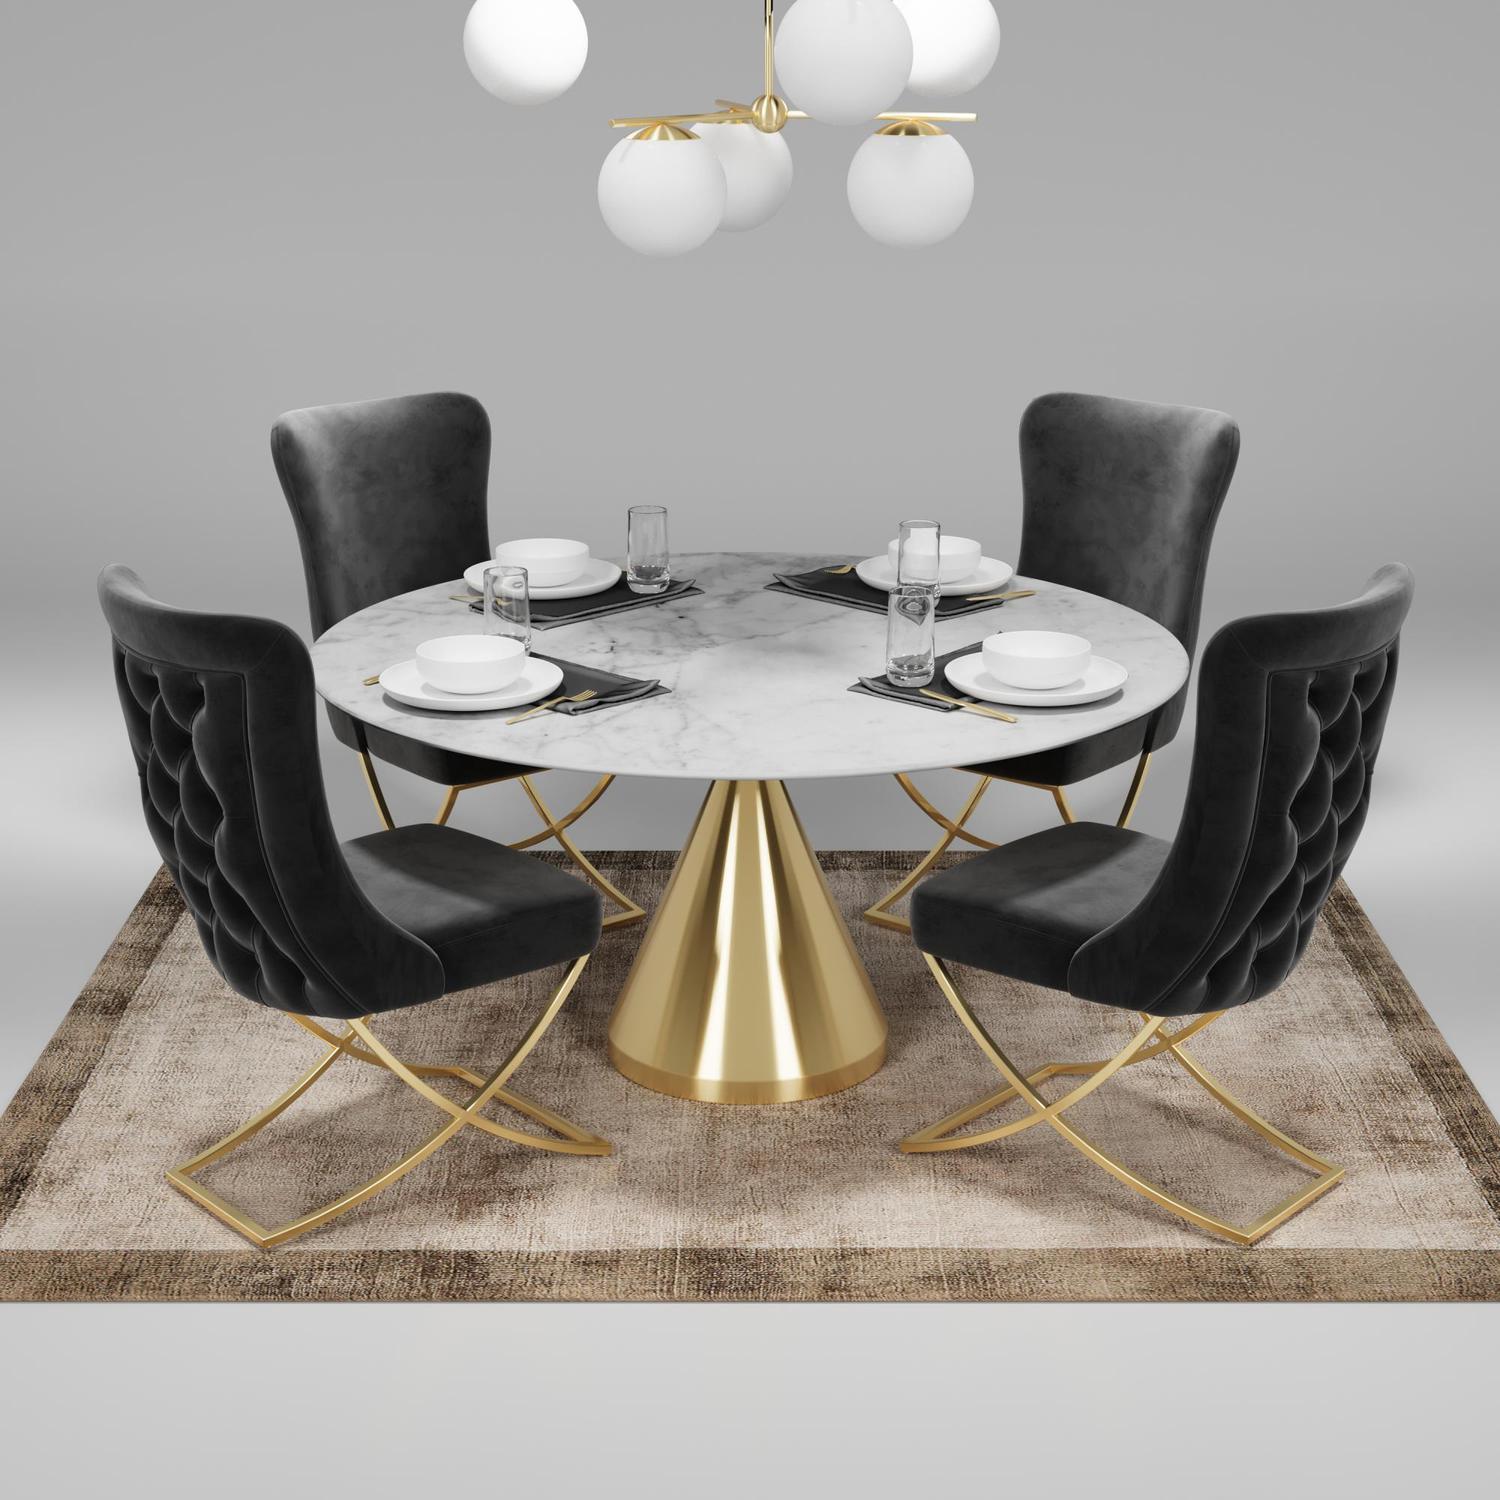 Sultan Collection Wing Back, Modern design, upholstered dining chair in Charcoal Gray with Gold Metal legs in a dining room with set of four chairs around a round table.